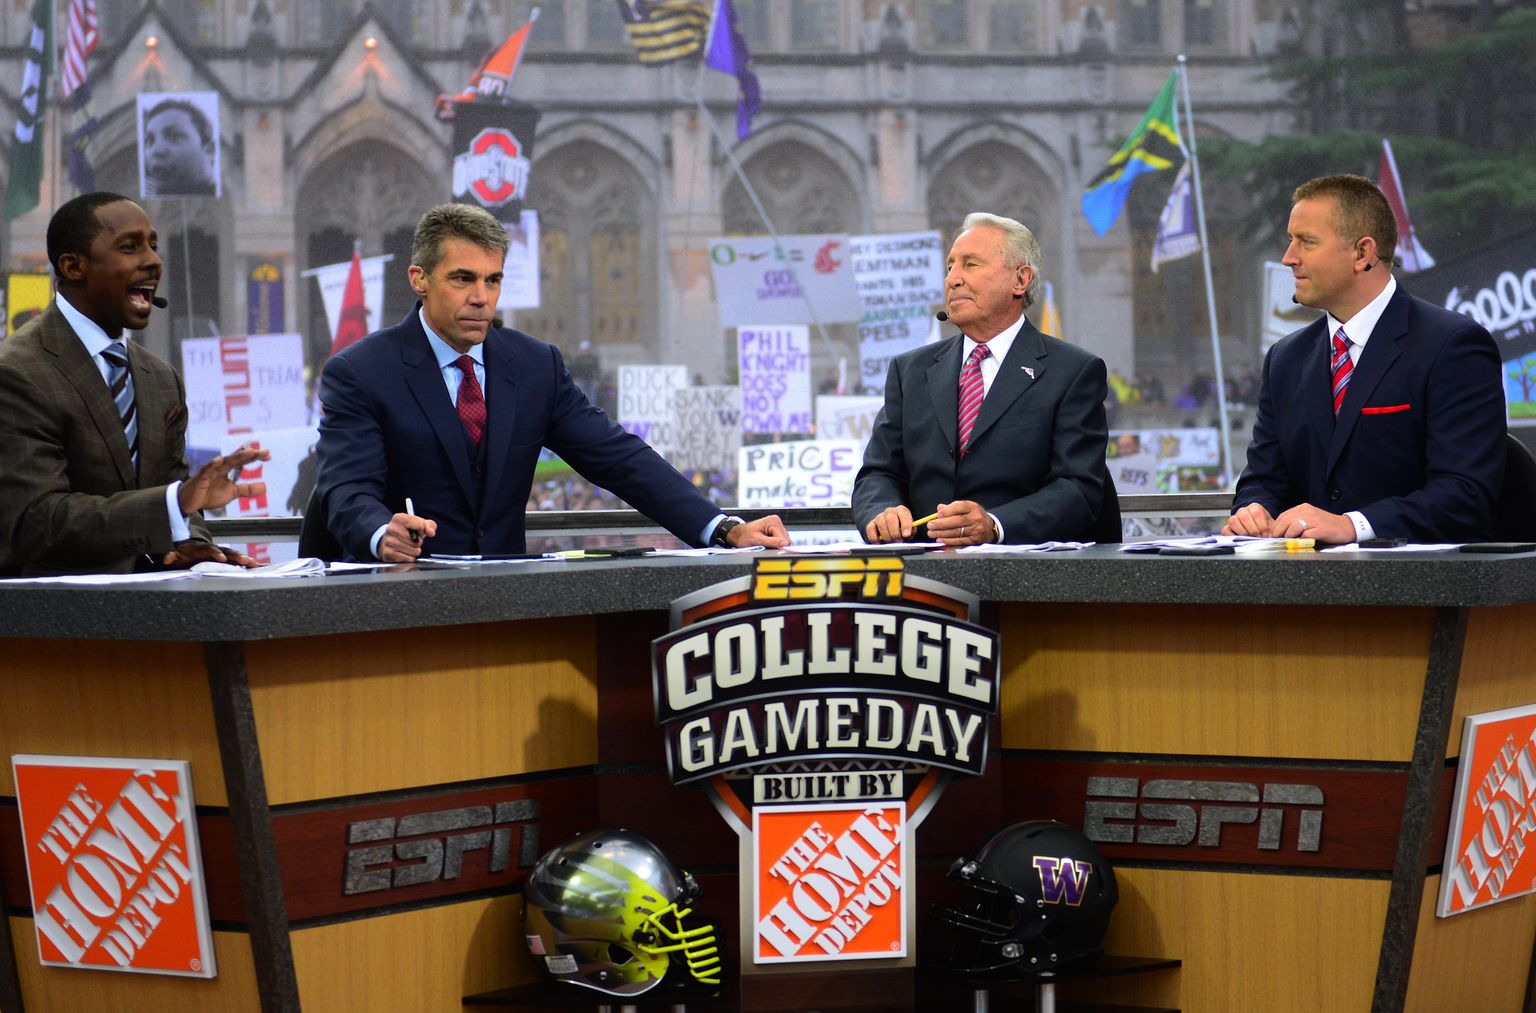 college football gameday visits